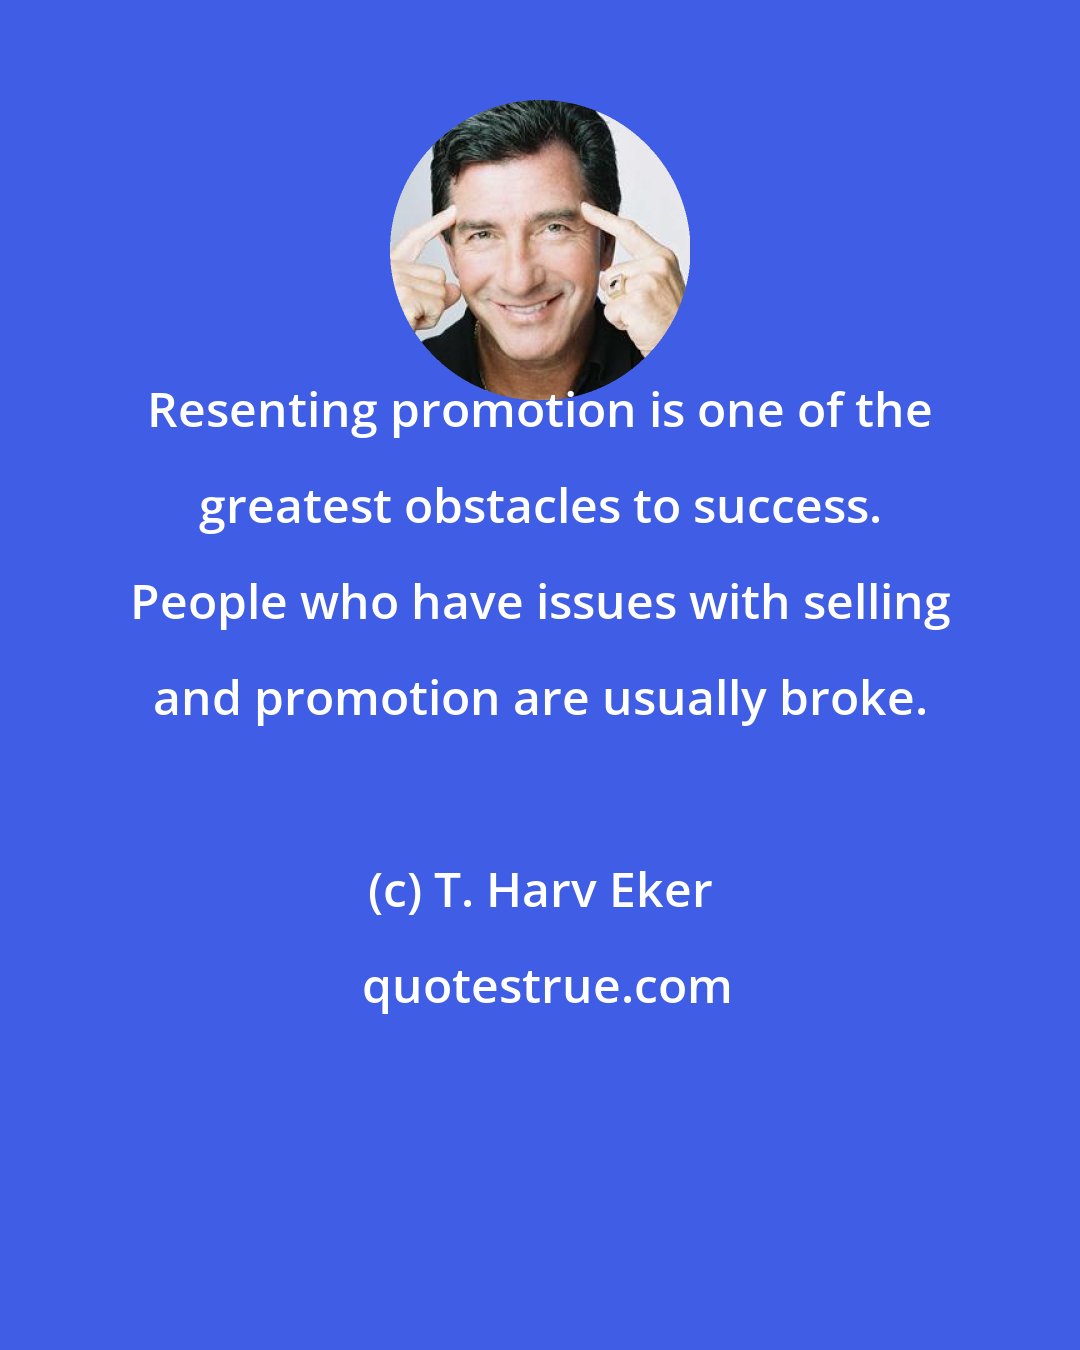 T. Harv Eker: Resenting promotion is one of the greatest obstacles to success. People who have issues with selling and promotion are usually broke.